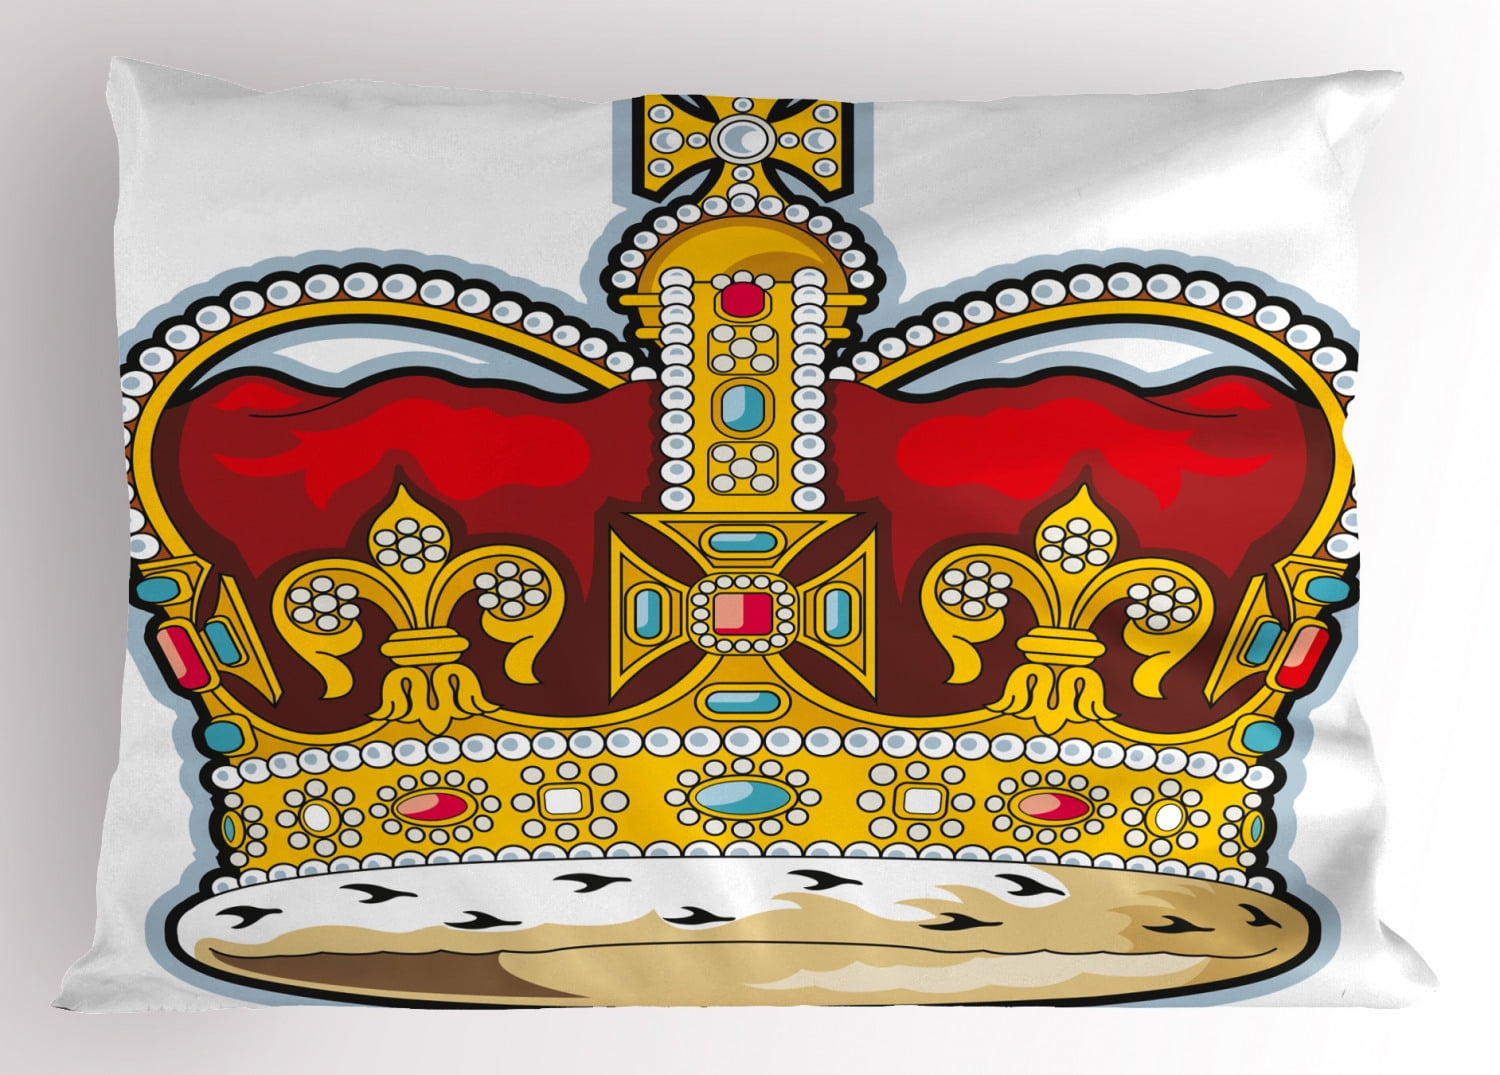 Details about   Medieval Pillow Sham Heraldic Coat of Arms Printed Pillowcase 30 x 20 Inches 